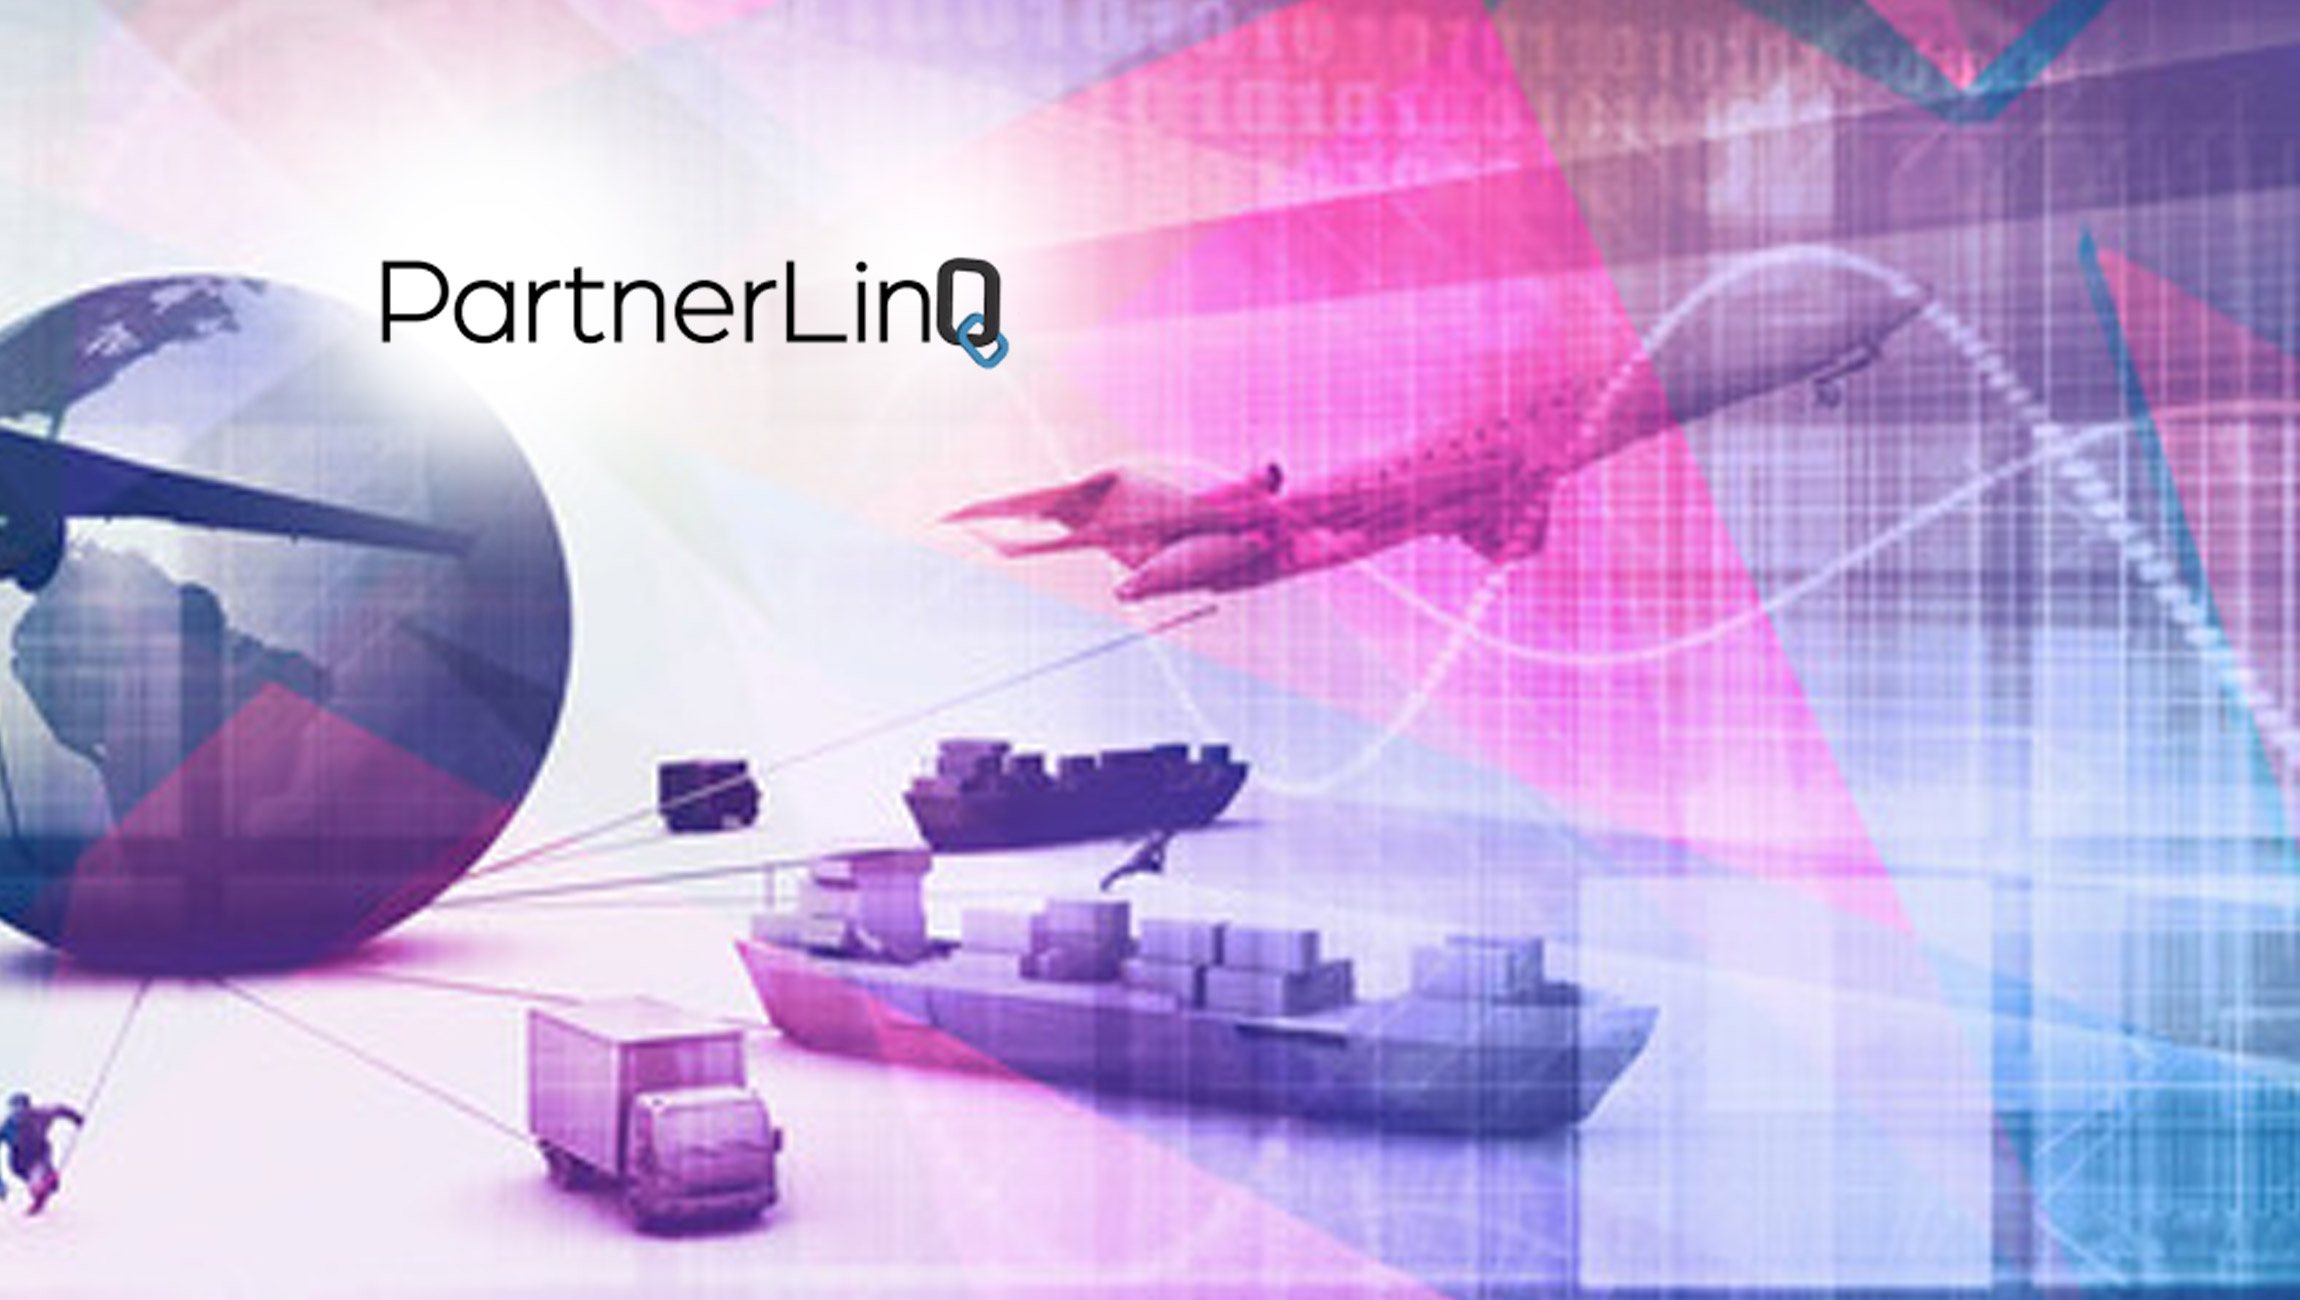 PartnerLinQ-Offers-First-to-Market-Digitally-Optimized-Supply-Chain-Integration-System